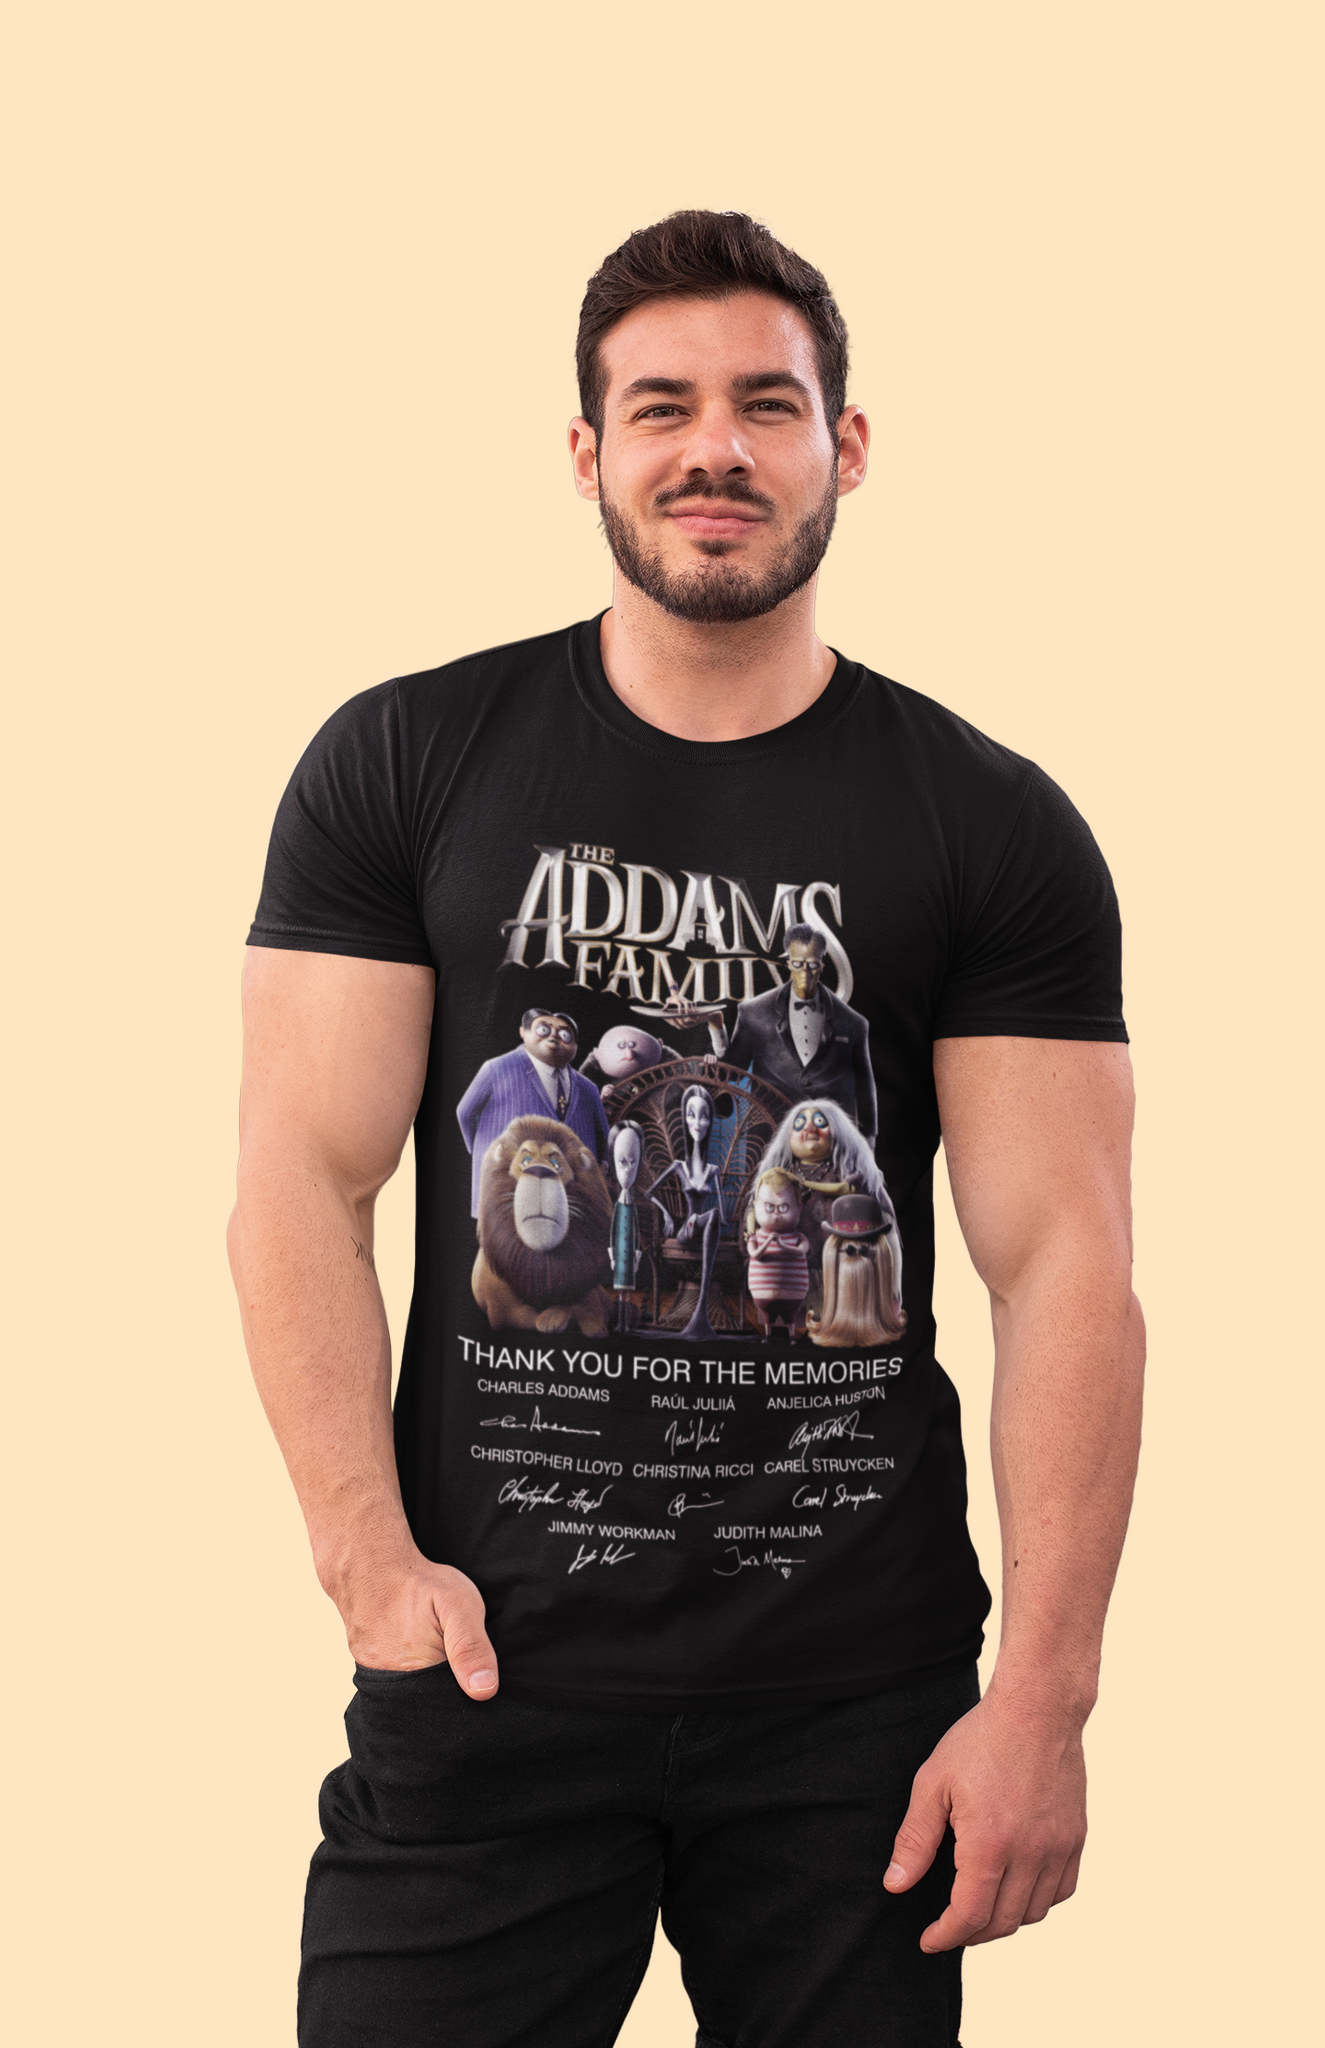 Addams Family T Shirt, Thank You For The Memories T Shirt, Halloween Gifts